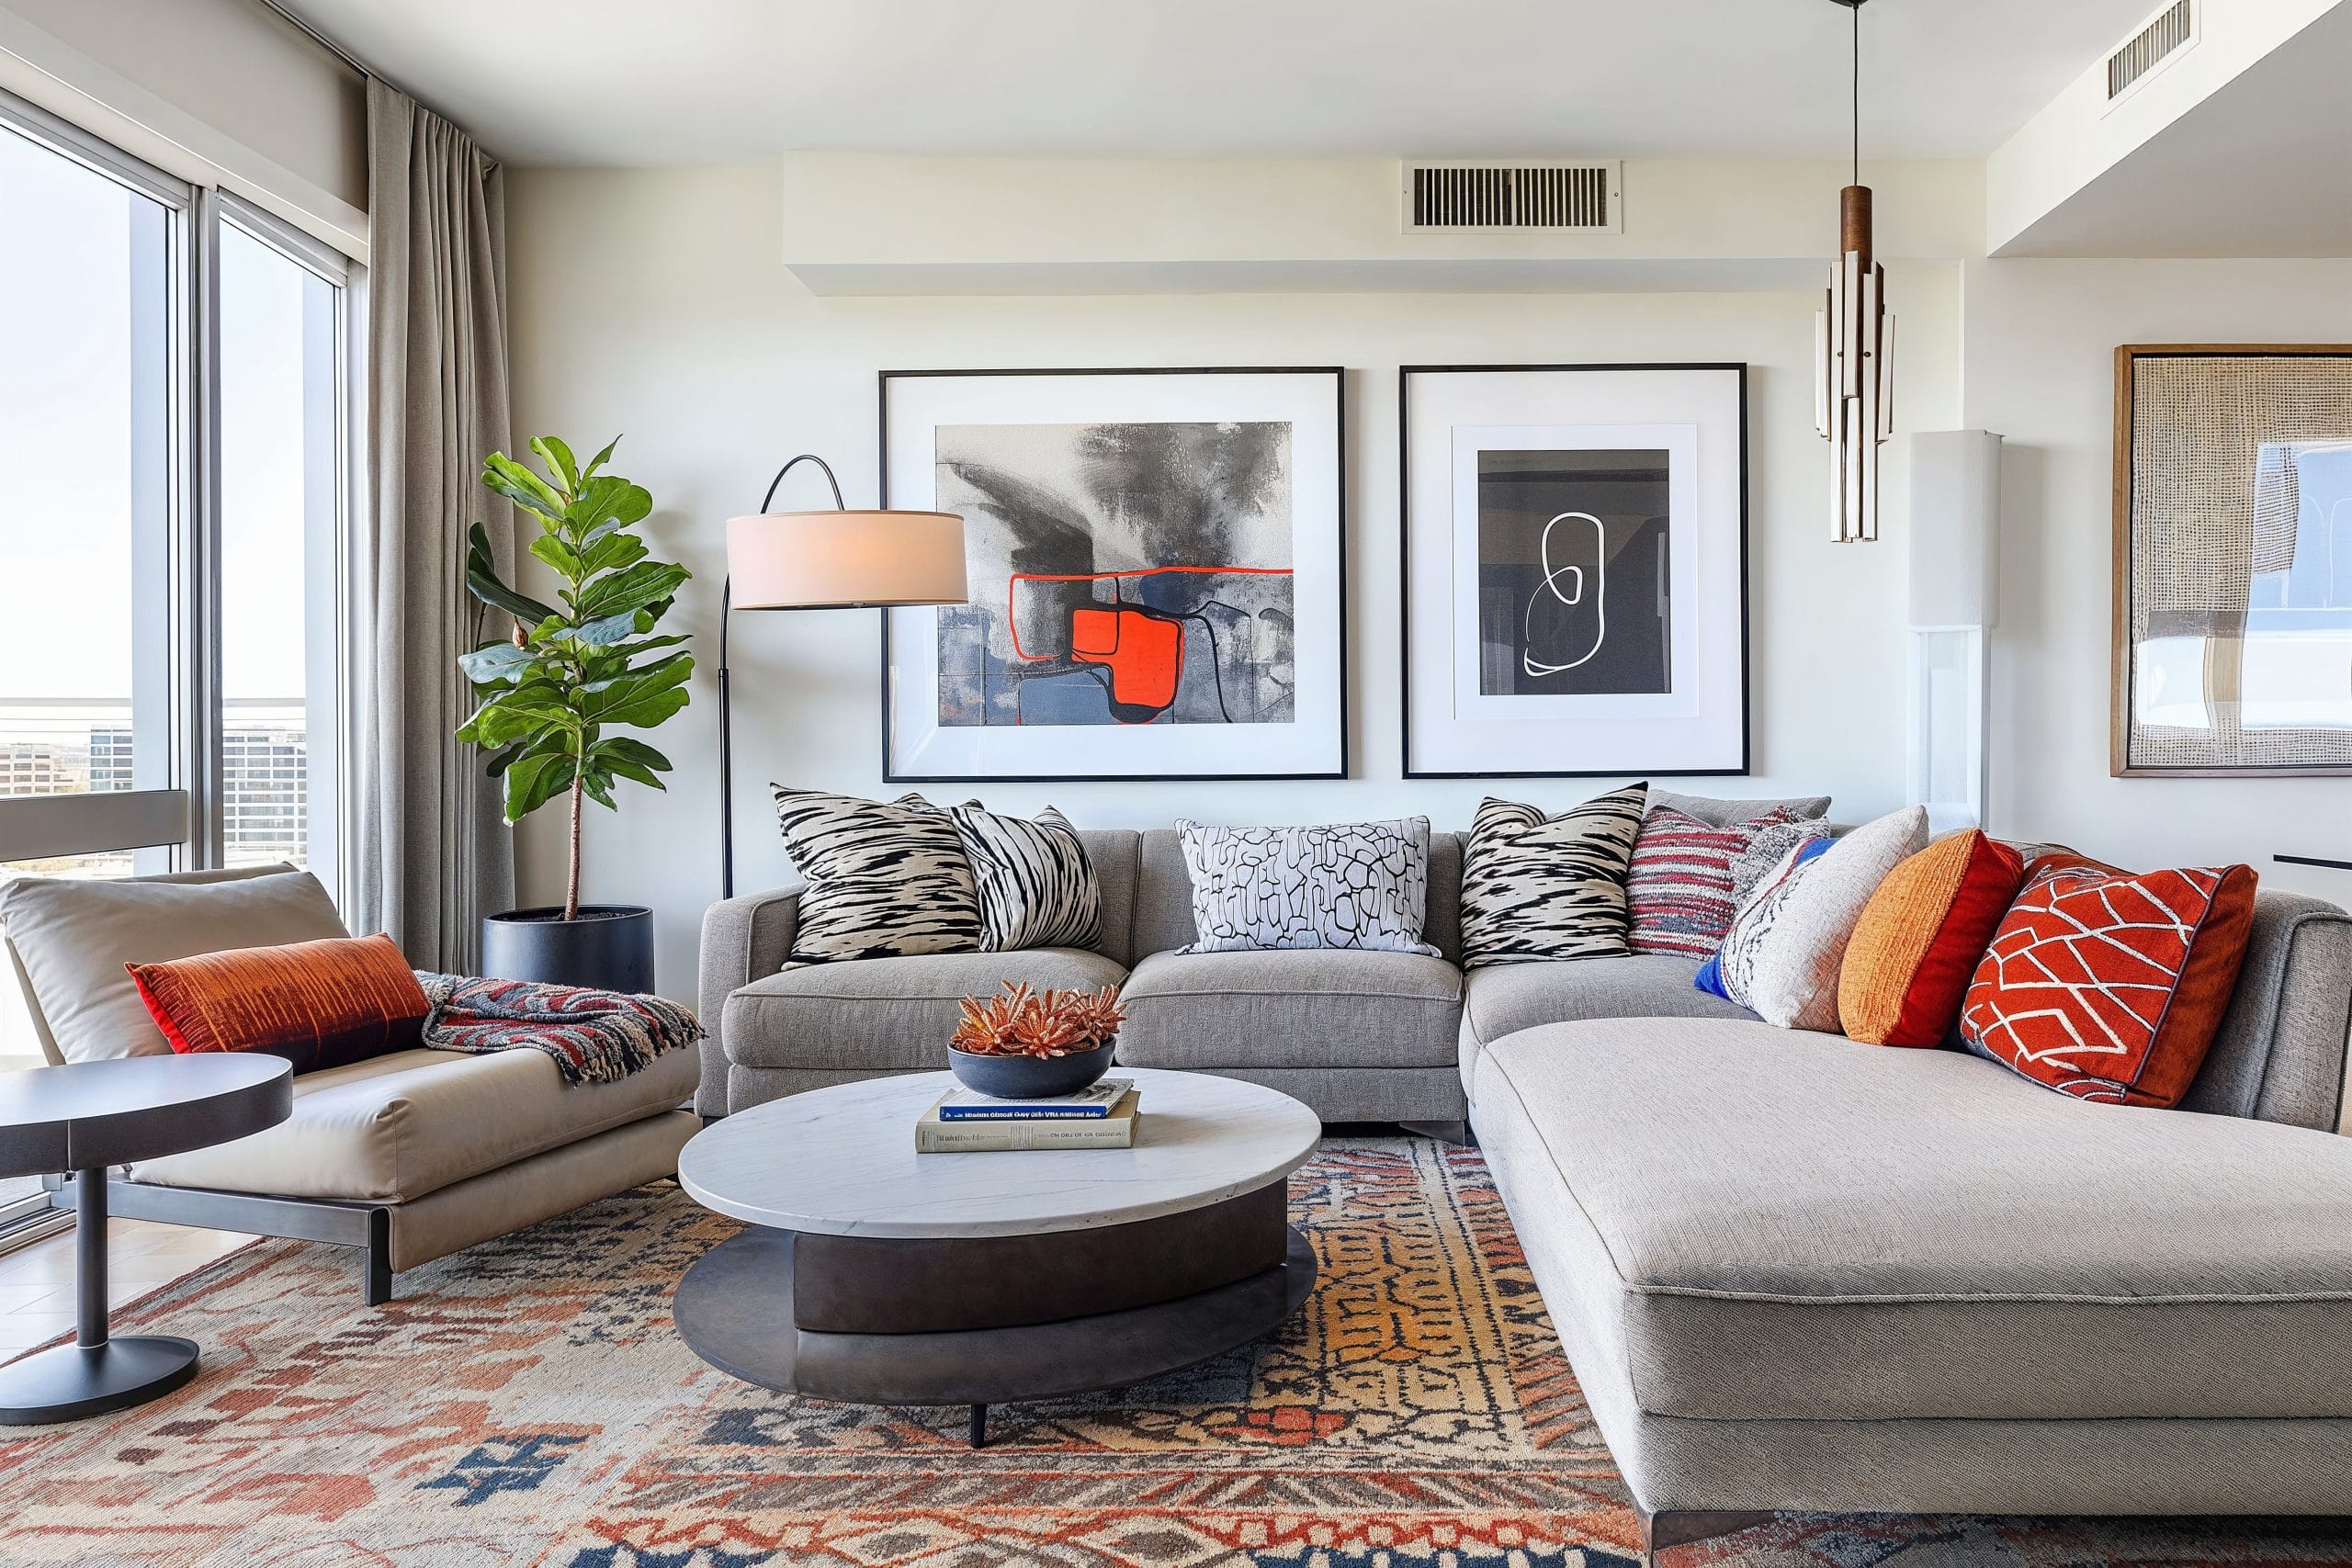 Top Interior Design Styles to Know Now, According to Pros